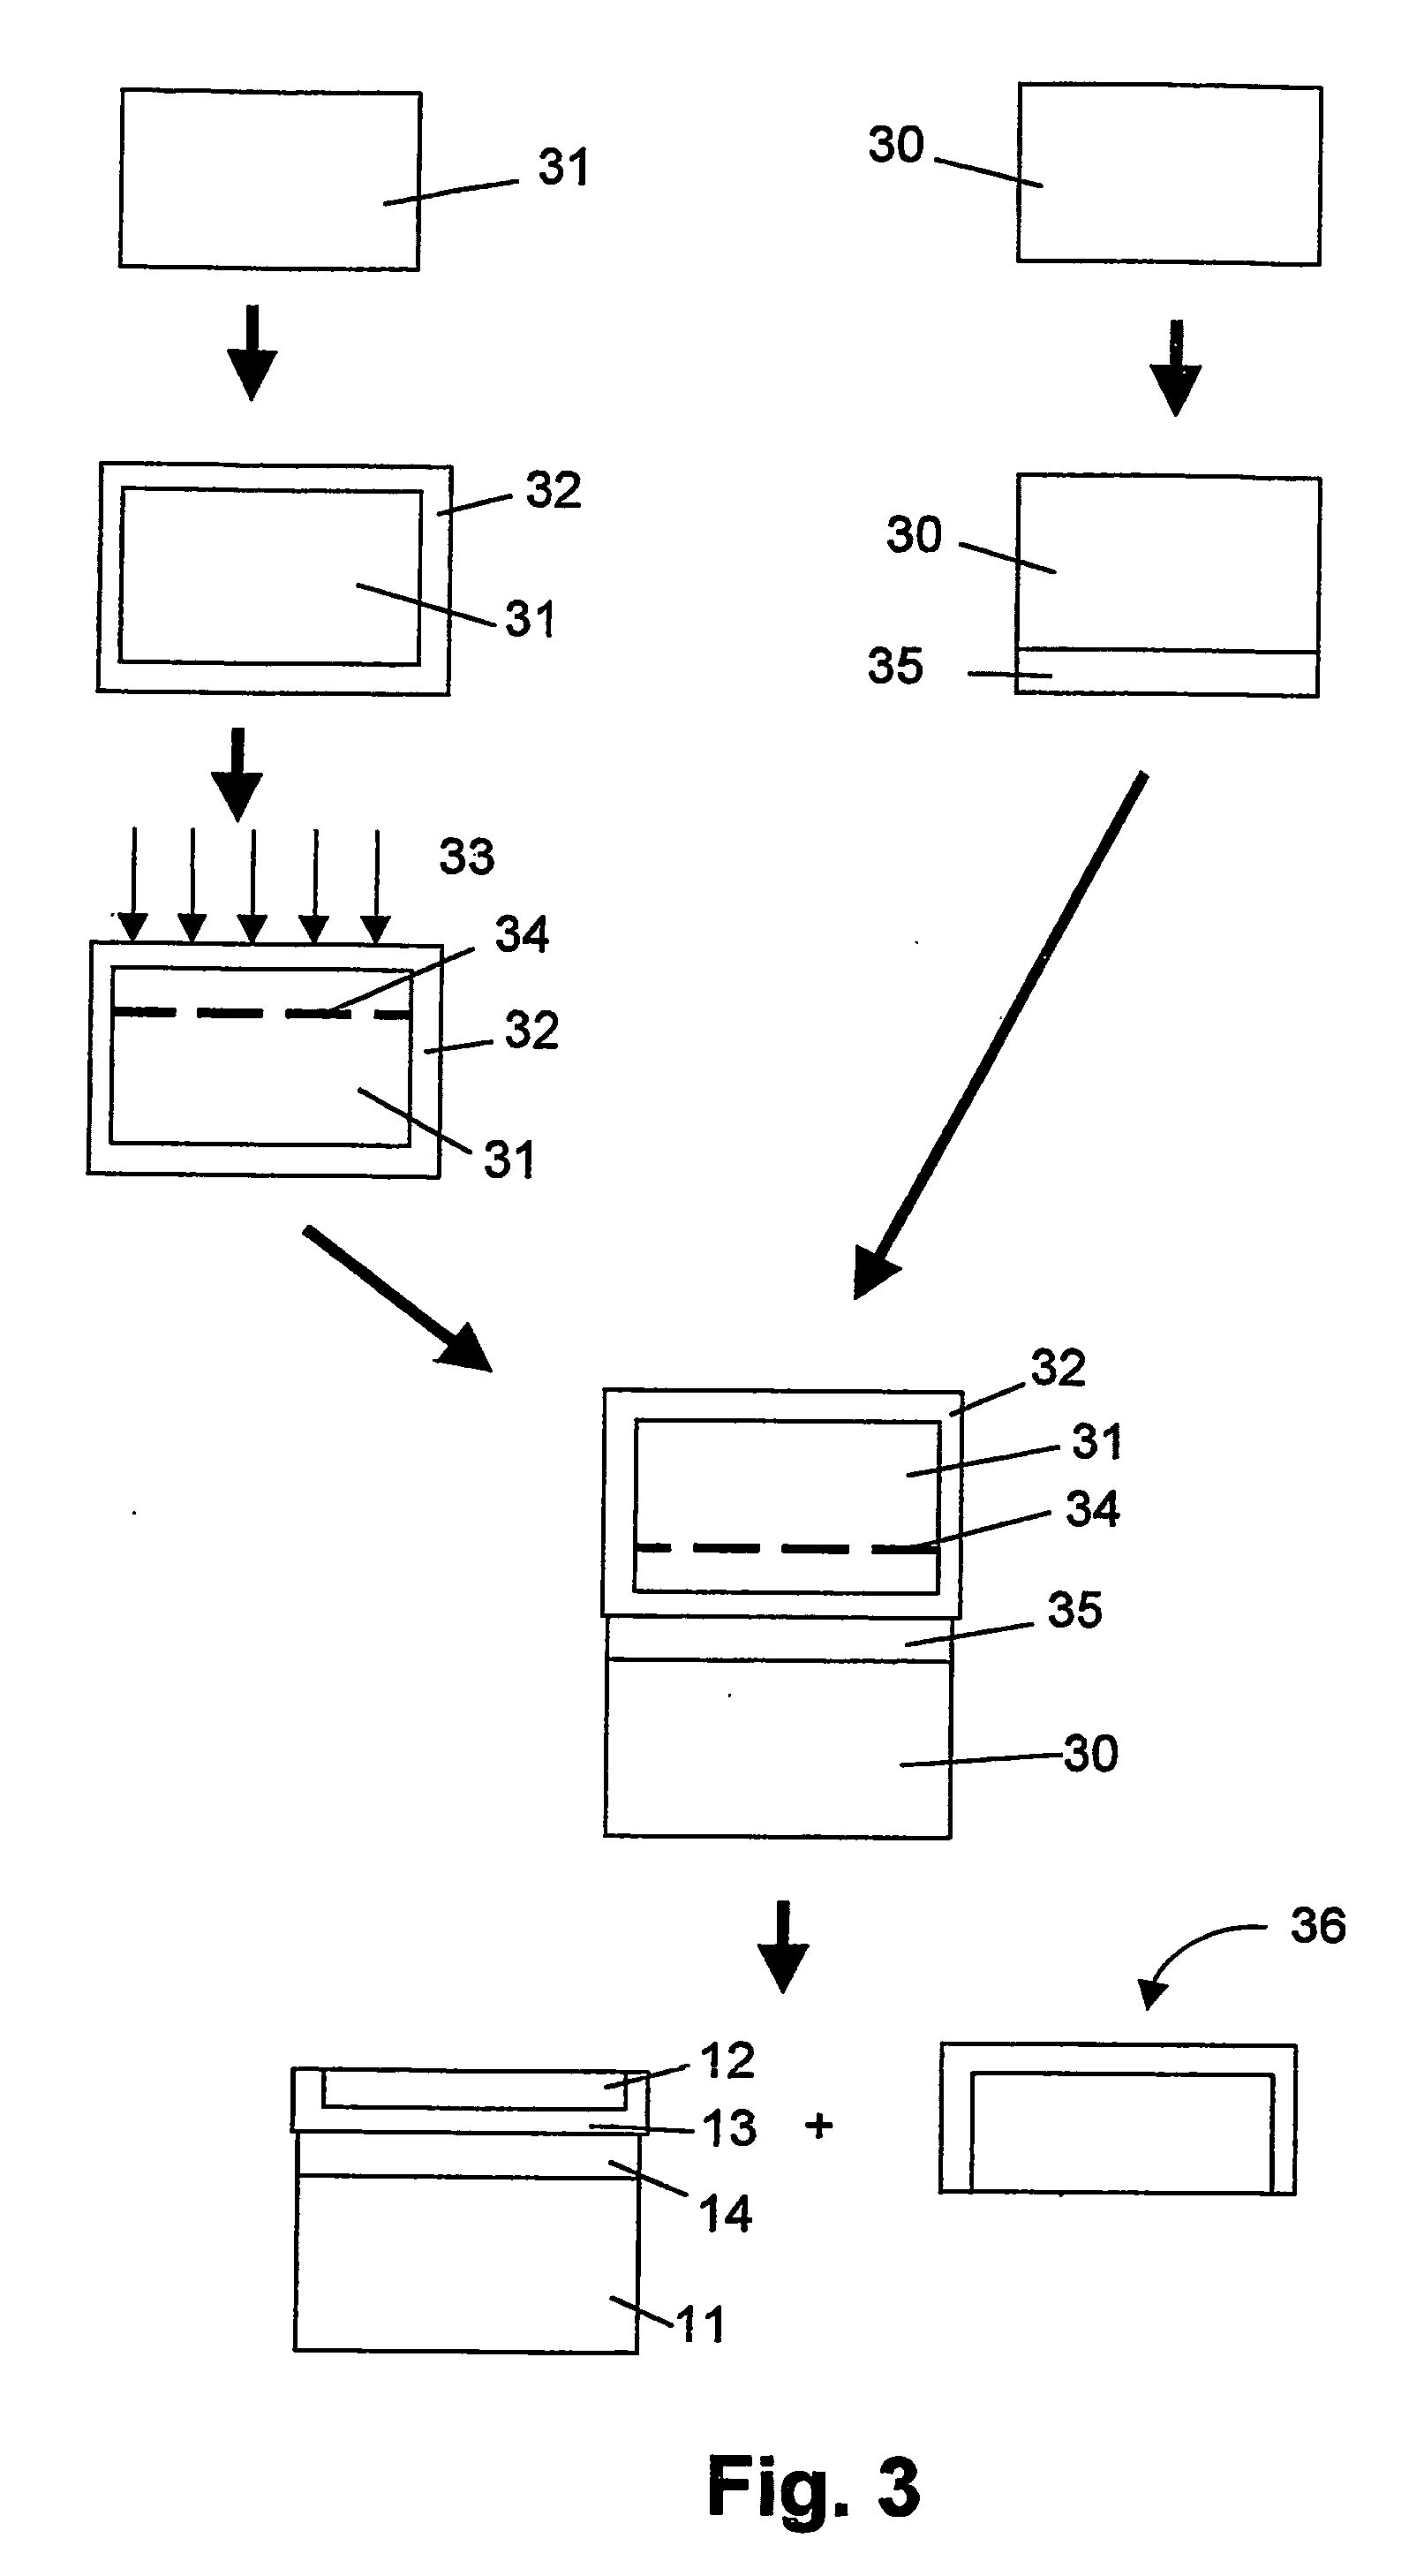 Method of manufacturing a multilayer semiconductor structure with reduced ohmic losses